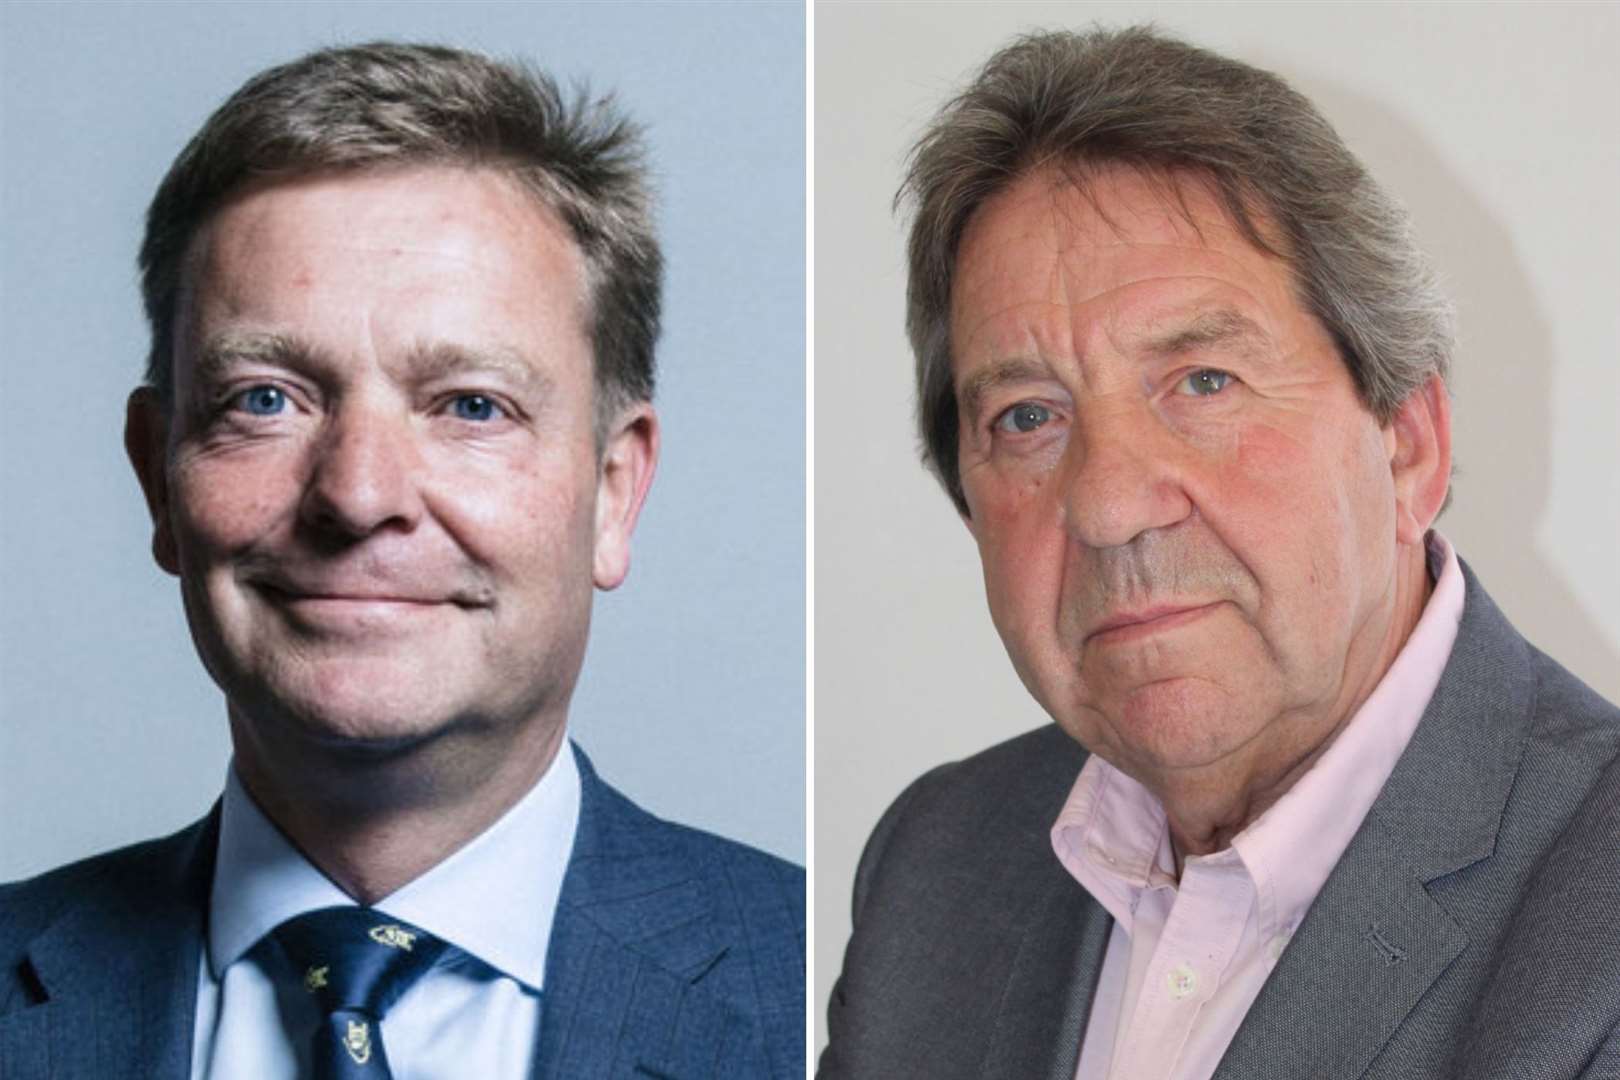 Craig Mackinlay and Gordon Henderson both voted against a second lockdown